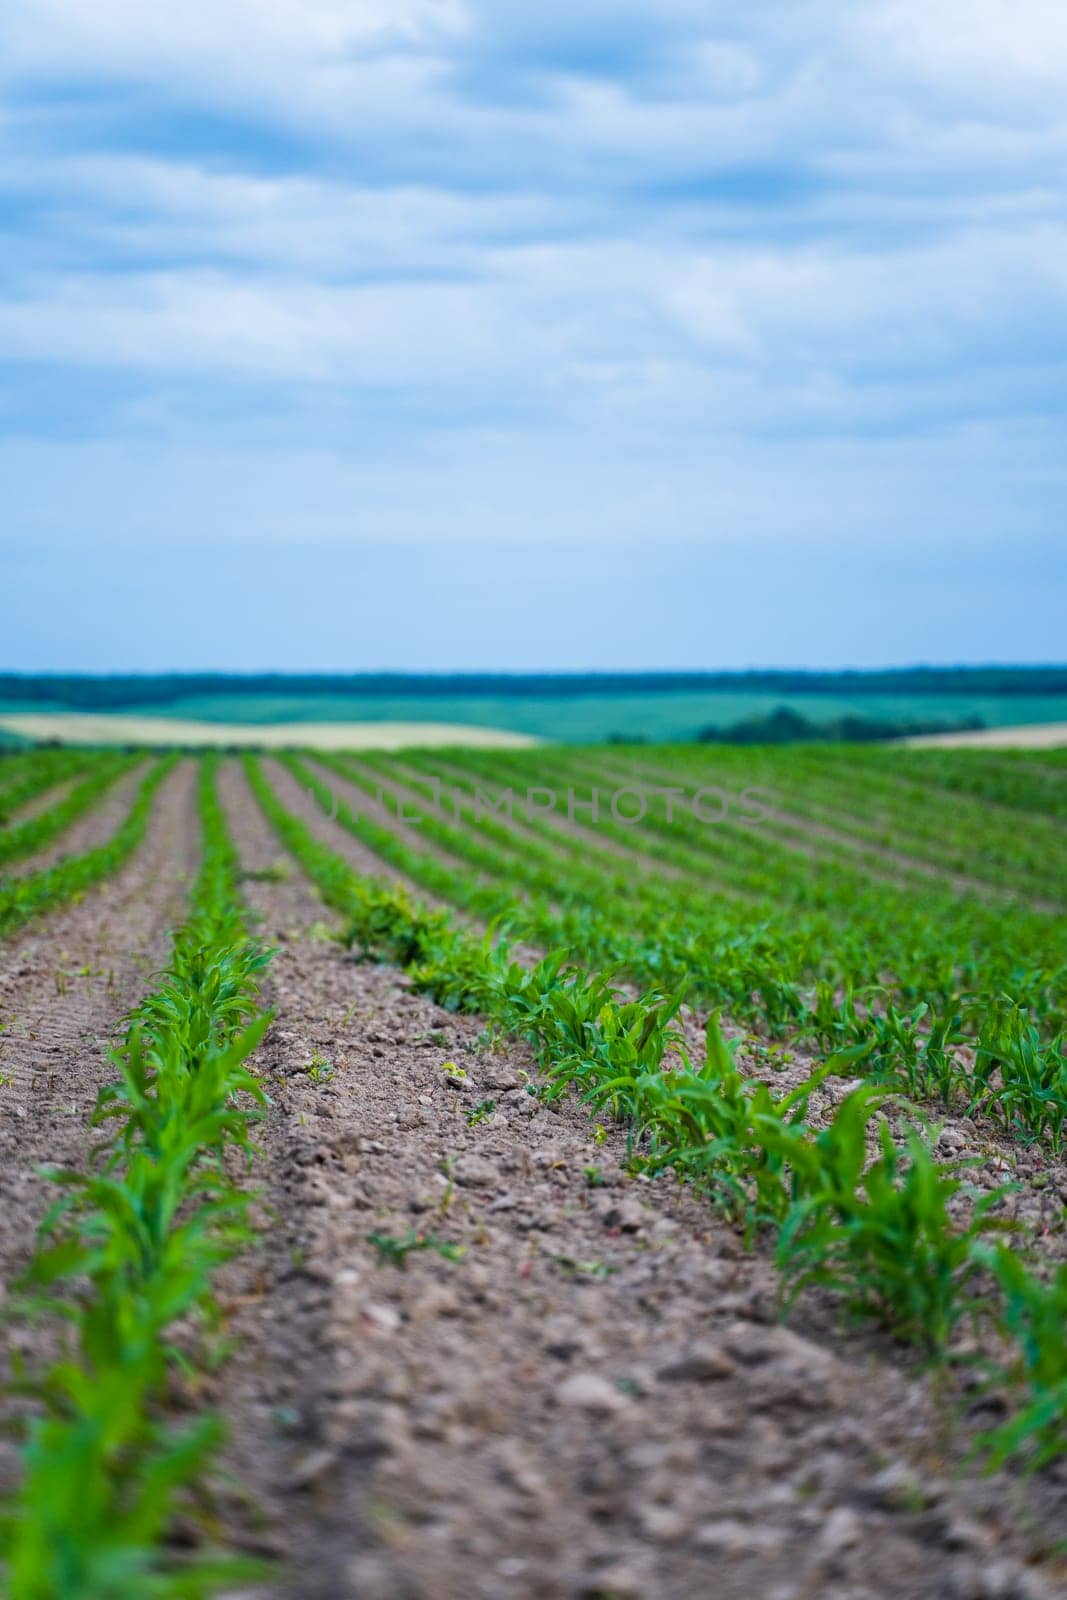 Rows of young green corn. Corn shoots. Green sprouts of corn maize on agricultural field. Cultivation of agricultural crop of maize in farmer's field